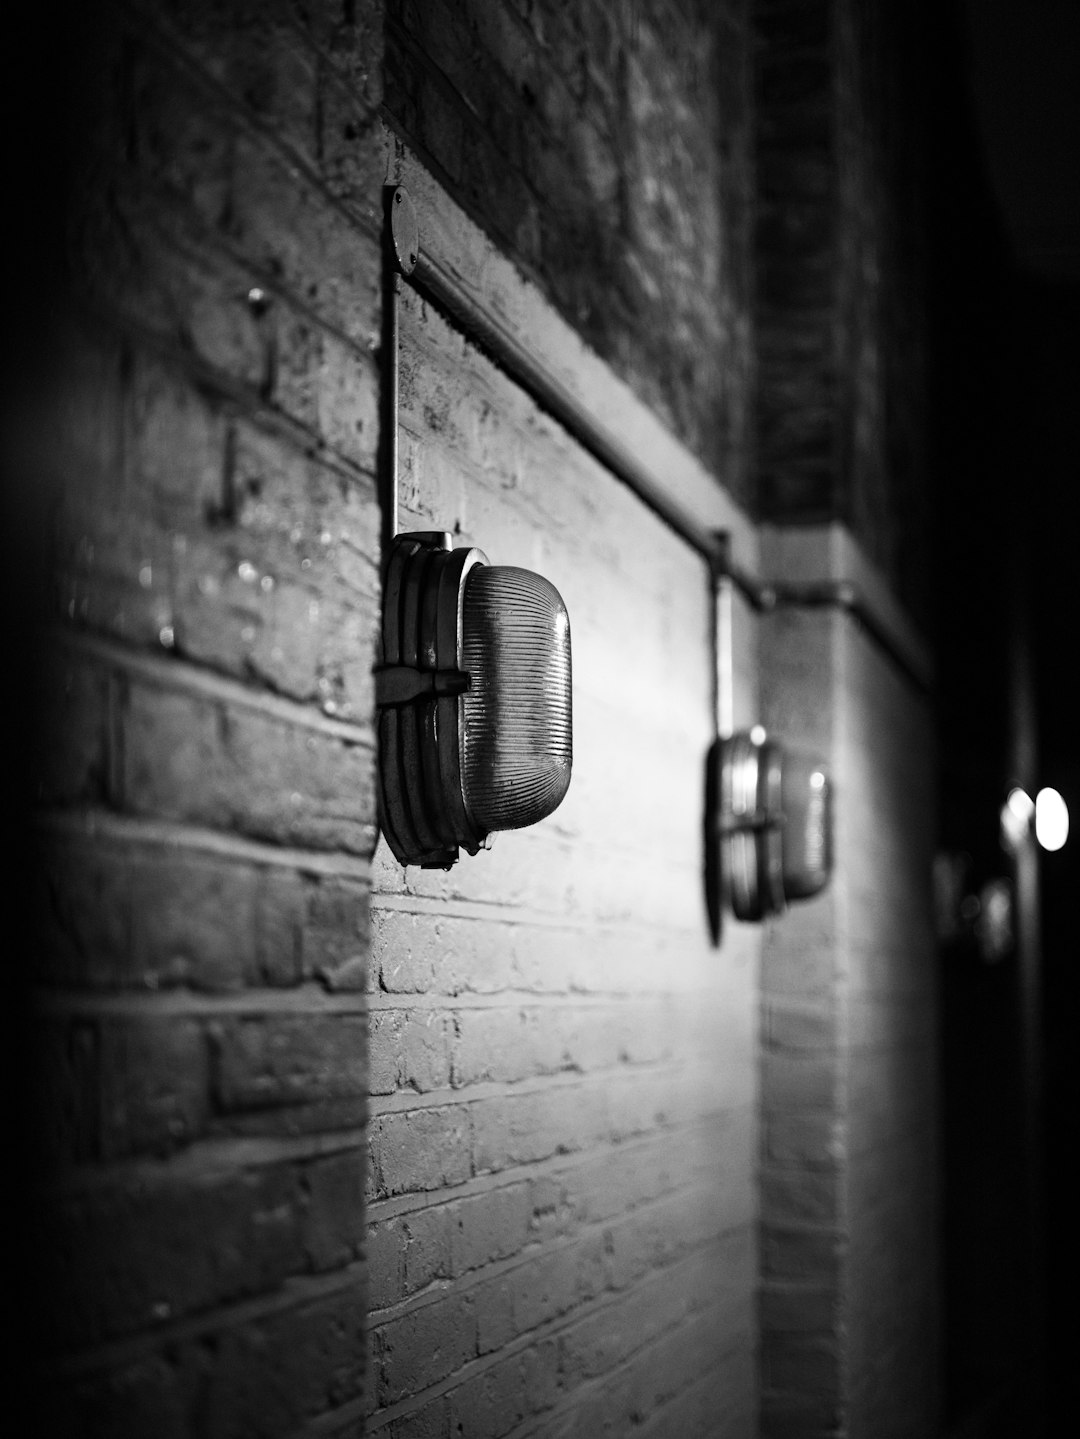 grayscale photo of wall mounted lamp